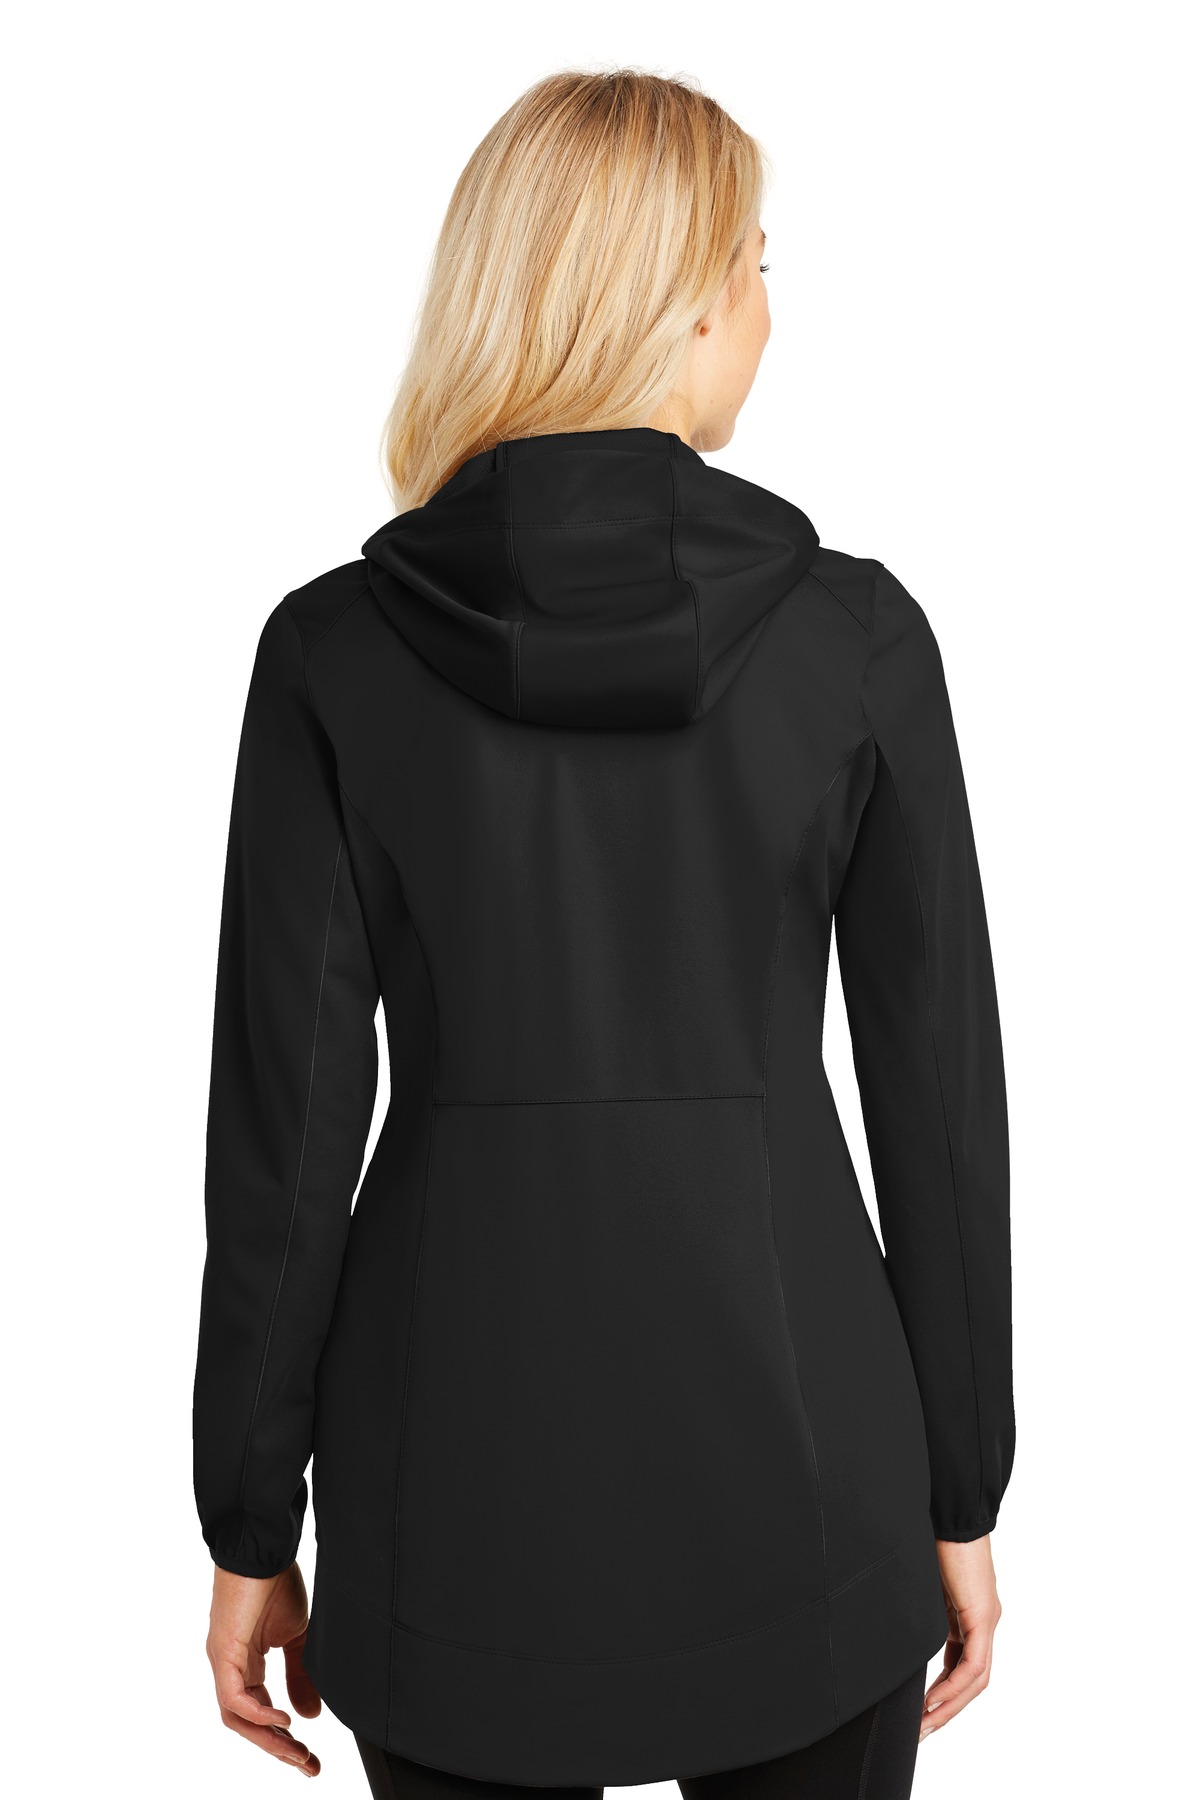 Port Authority Ladies Active Hooded Soft Shell Jacket-XS (Deep Black) - image 2 of 6